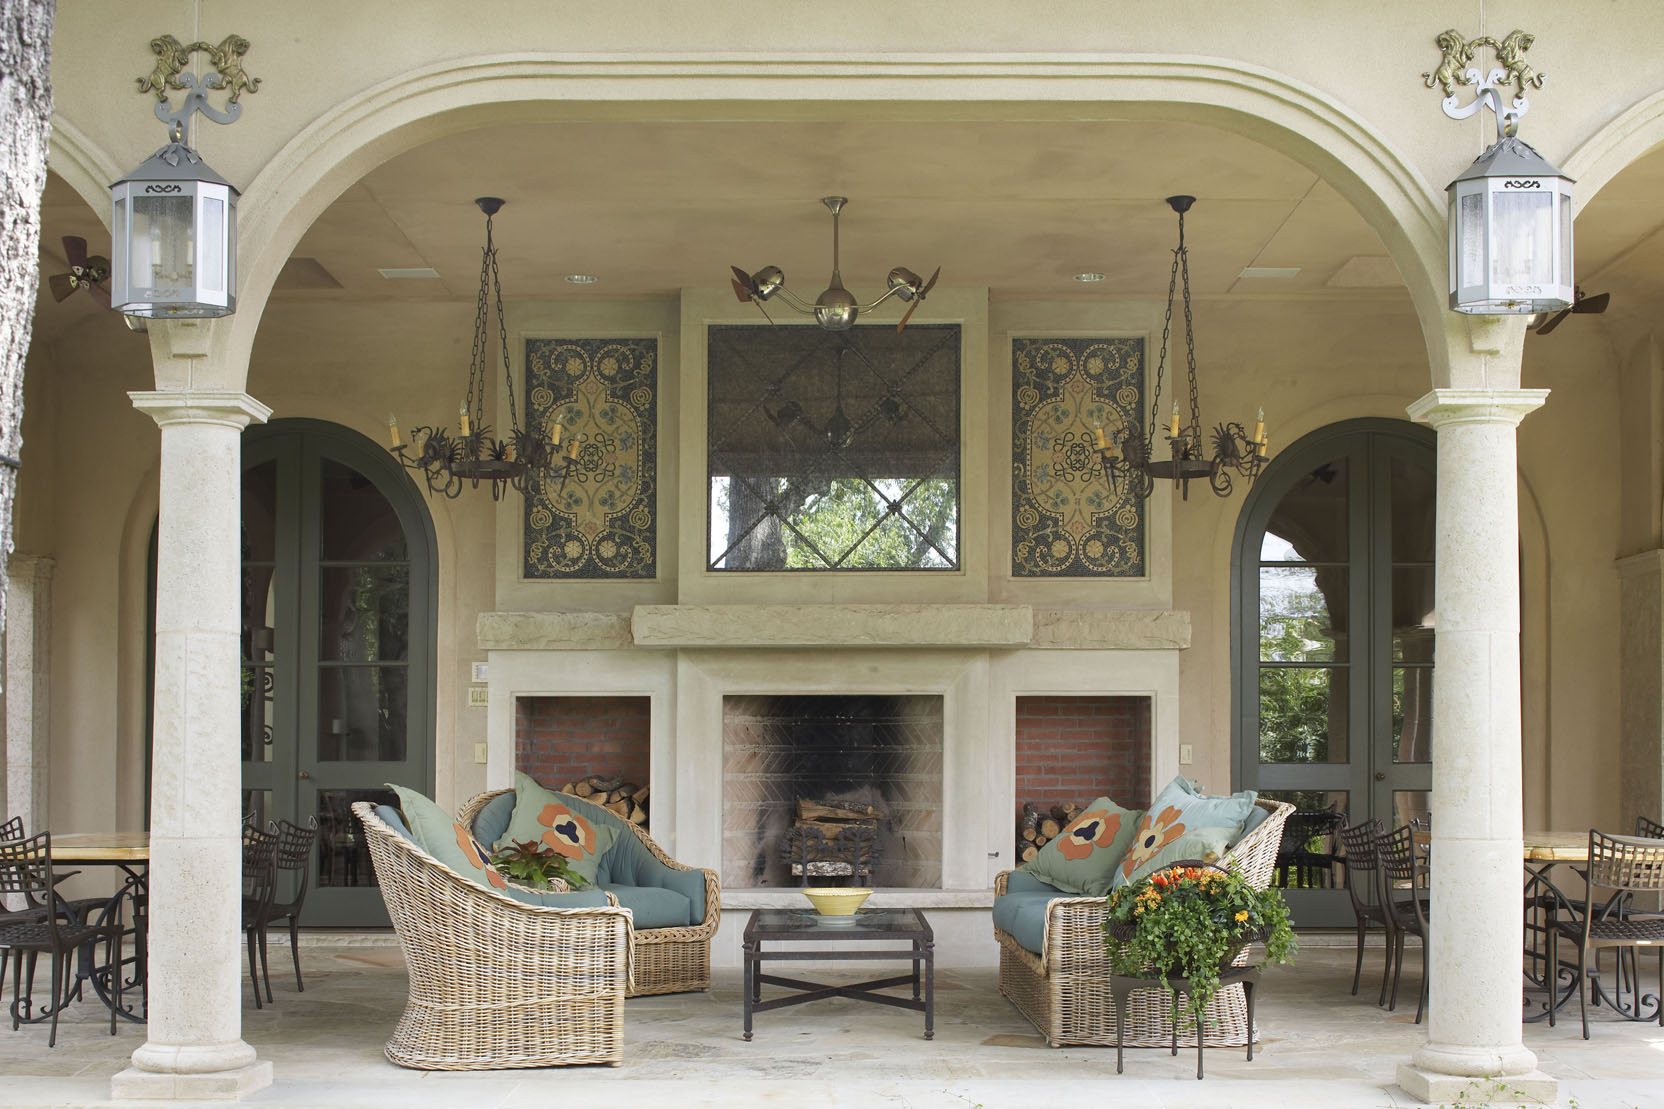 Beautiful outdoor seating area with tables, chairs, and a fireplace